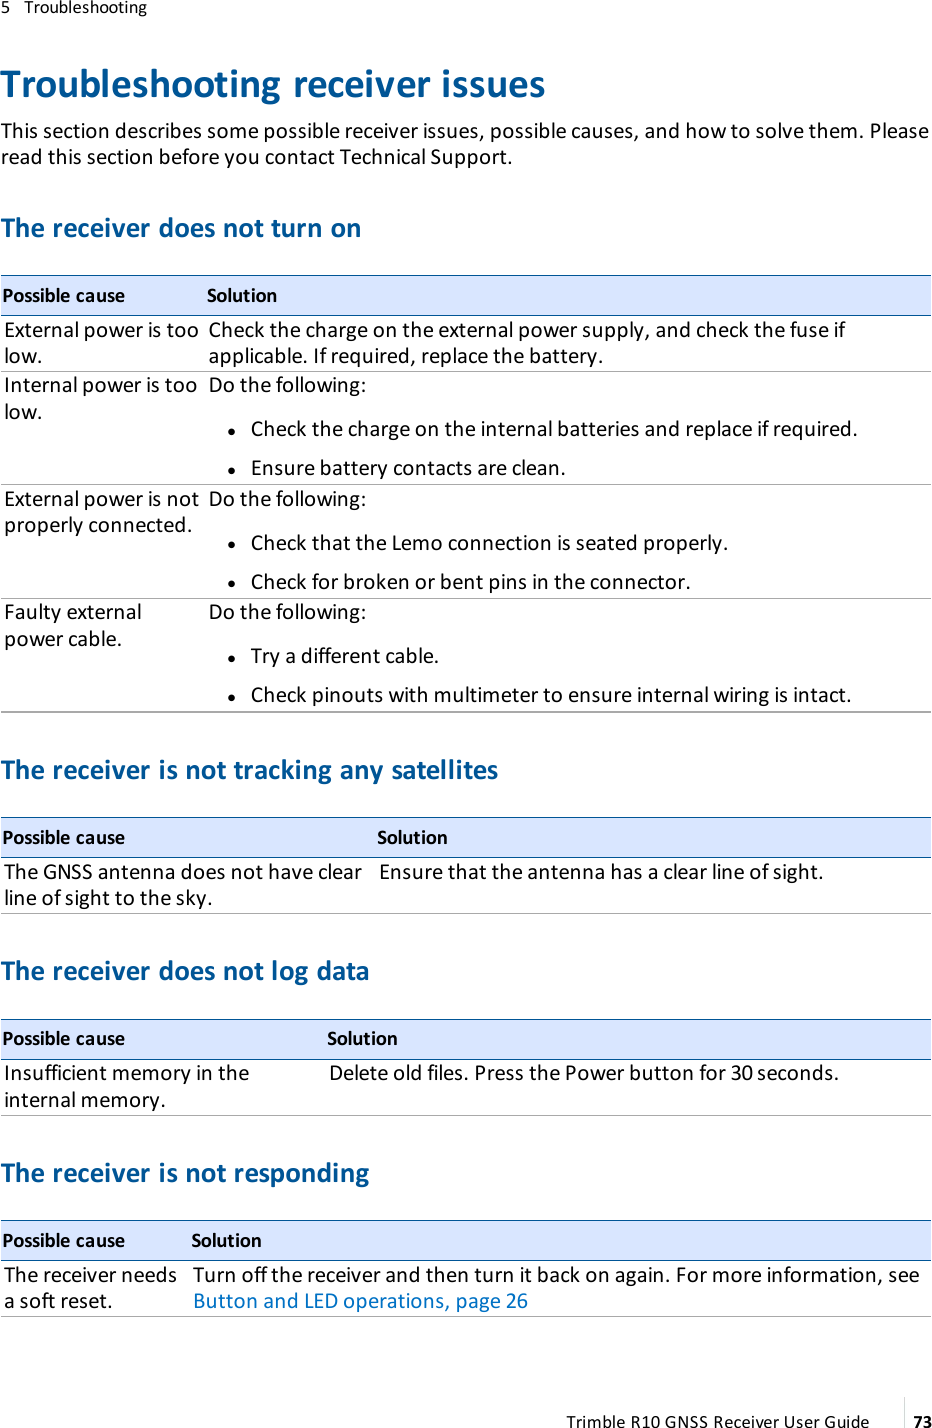 5   TroubleshootingTroubleshooting receiver issuesThis section describes some possible receiver issues, possible causes, and how to solve them. Please read this section before you contact Technical Support.The receiver does not turn onPossible cause SolutionExternal power is too low.Check the charge on the external power supply, and check the fuse if applicable. If required, replace the battery.Internal power is too low.Do the following: lCheck the charge on the internal batteries and replace if required.  lEnsure battery contacts are clean.External power is not properly connected.Do the following: lCheck that the Lemo connection is seated properly.   lCheck for broken or bent pins in the connector.Faulty external power cable.Do the following: lTry a different cable.   lCheck pinouts with multimeter to ensure internal wiring is intact.The receiver is not tracking any satellites Possible cause SolutionThe GNSS antenna does not have clear line of sight to the sky.Ensure that the antenna has a clear line of sight.The receiver does not log dataPossible cause SolutionInsufficient memory in the internal memory.Delete old files. Press the Power button for 30 seconds.The receiver is not responding Possible cause SolutionThe receiver needs a soft reset.Turn off the receiver and then turn it back on again. For more information, see Button and LED operations, page 26Trimble R10 GNSS Receiver User Guide 73